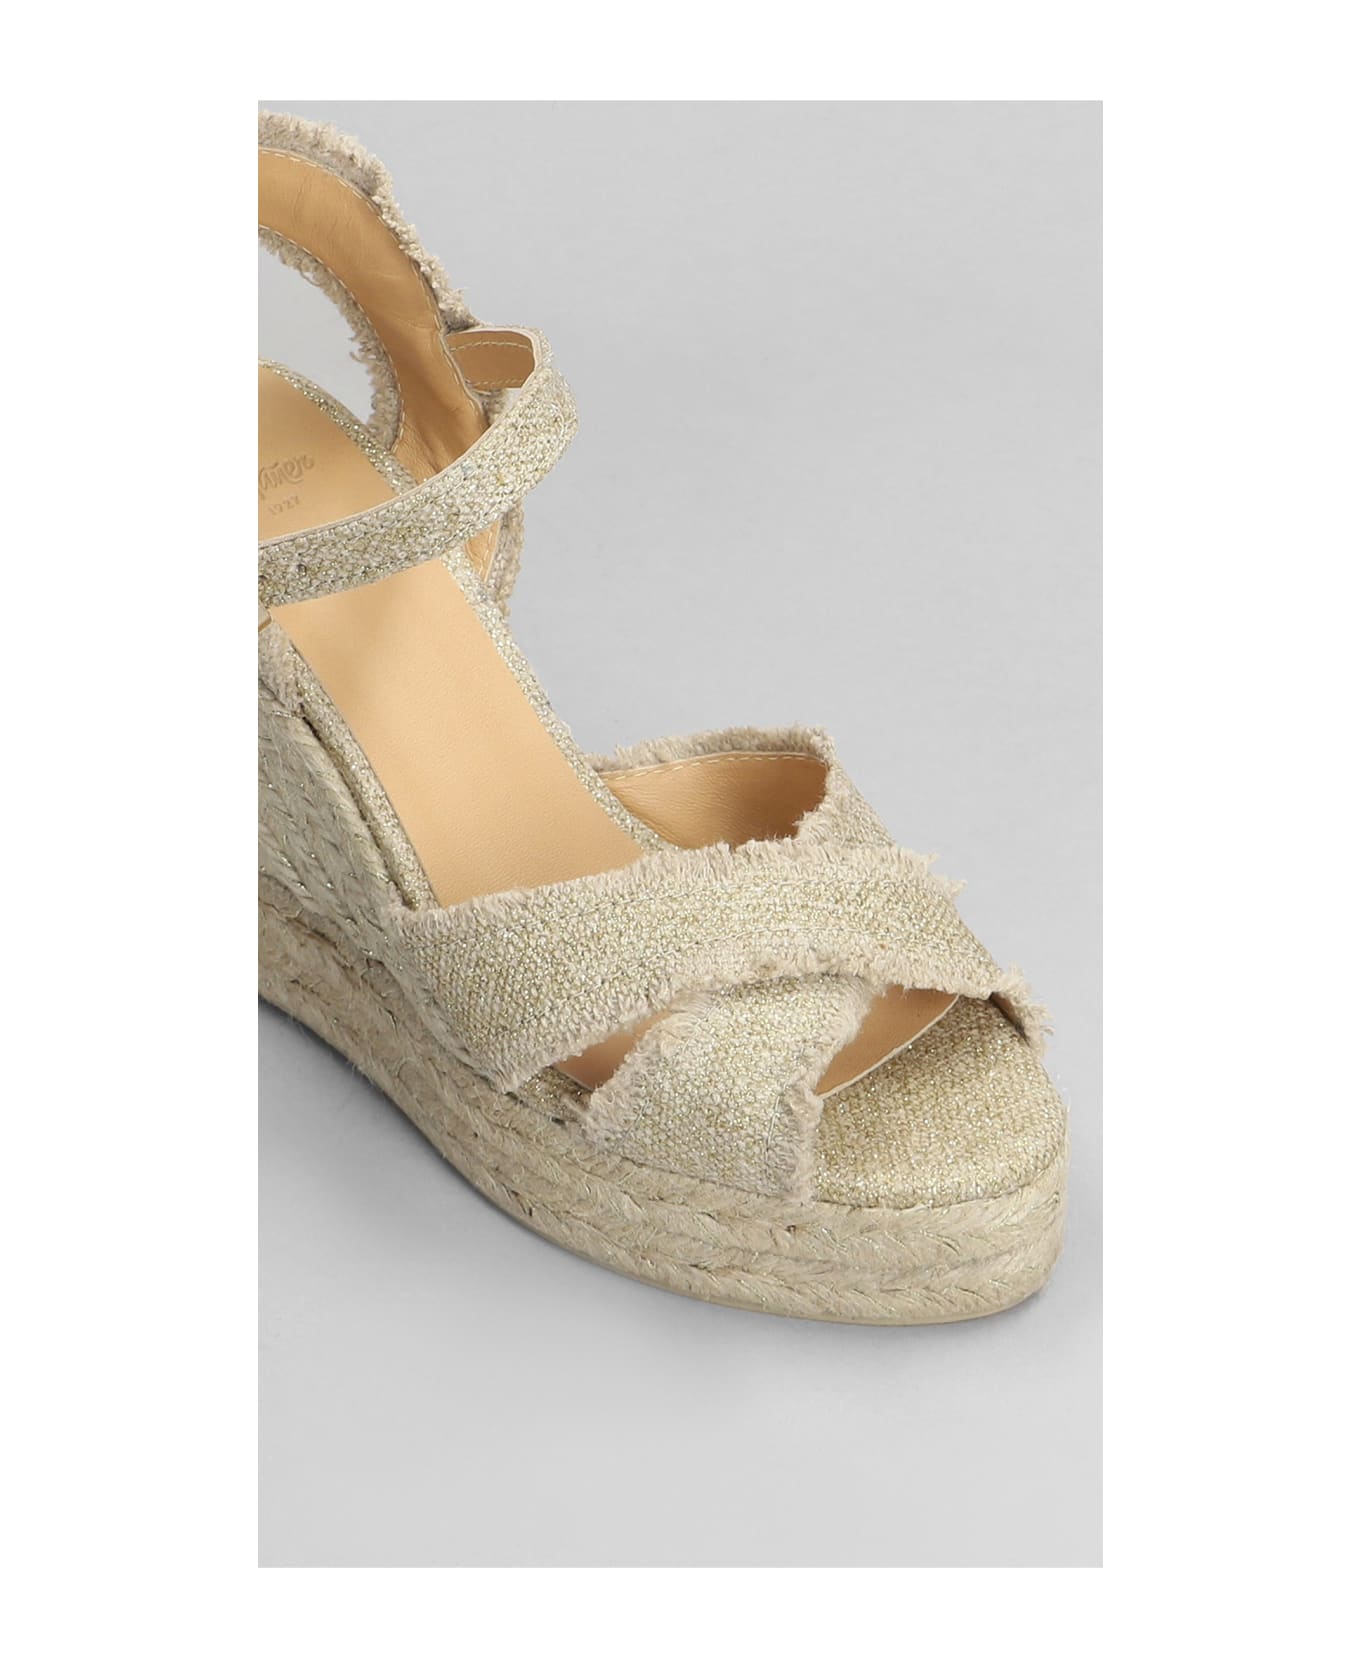 Castañer Bromelia-8ed-032 Wedges In Gold Canvas - gold サンダル